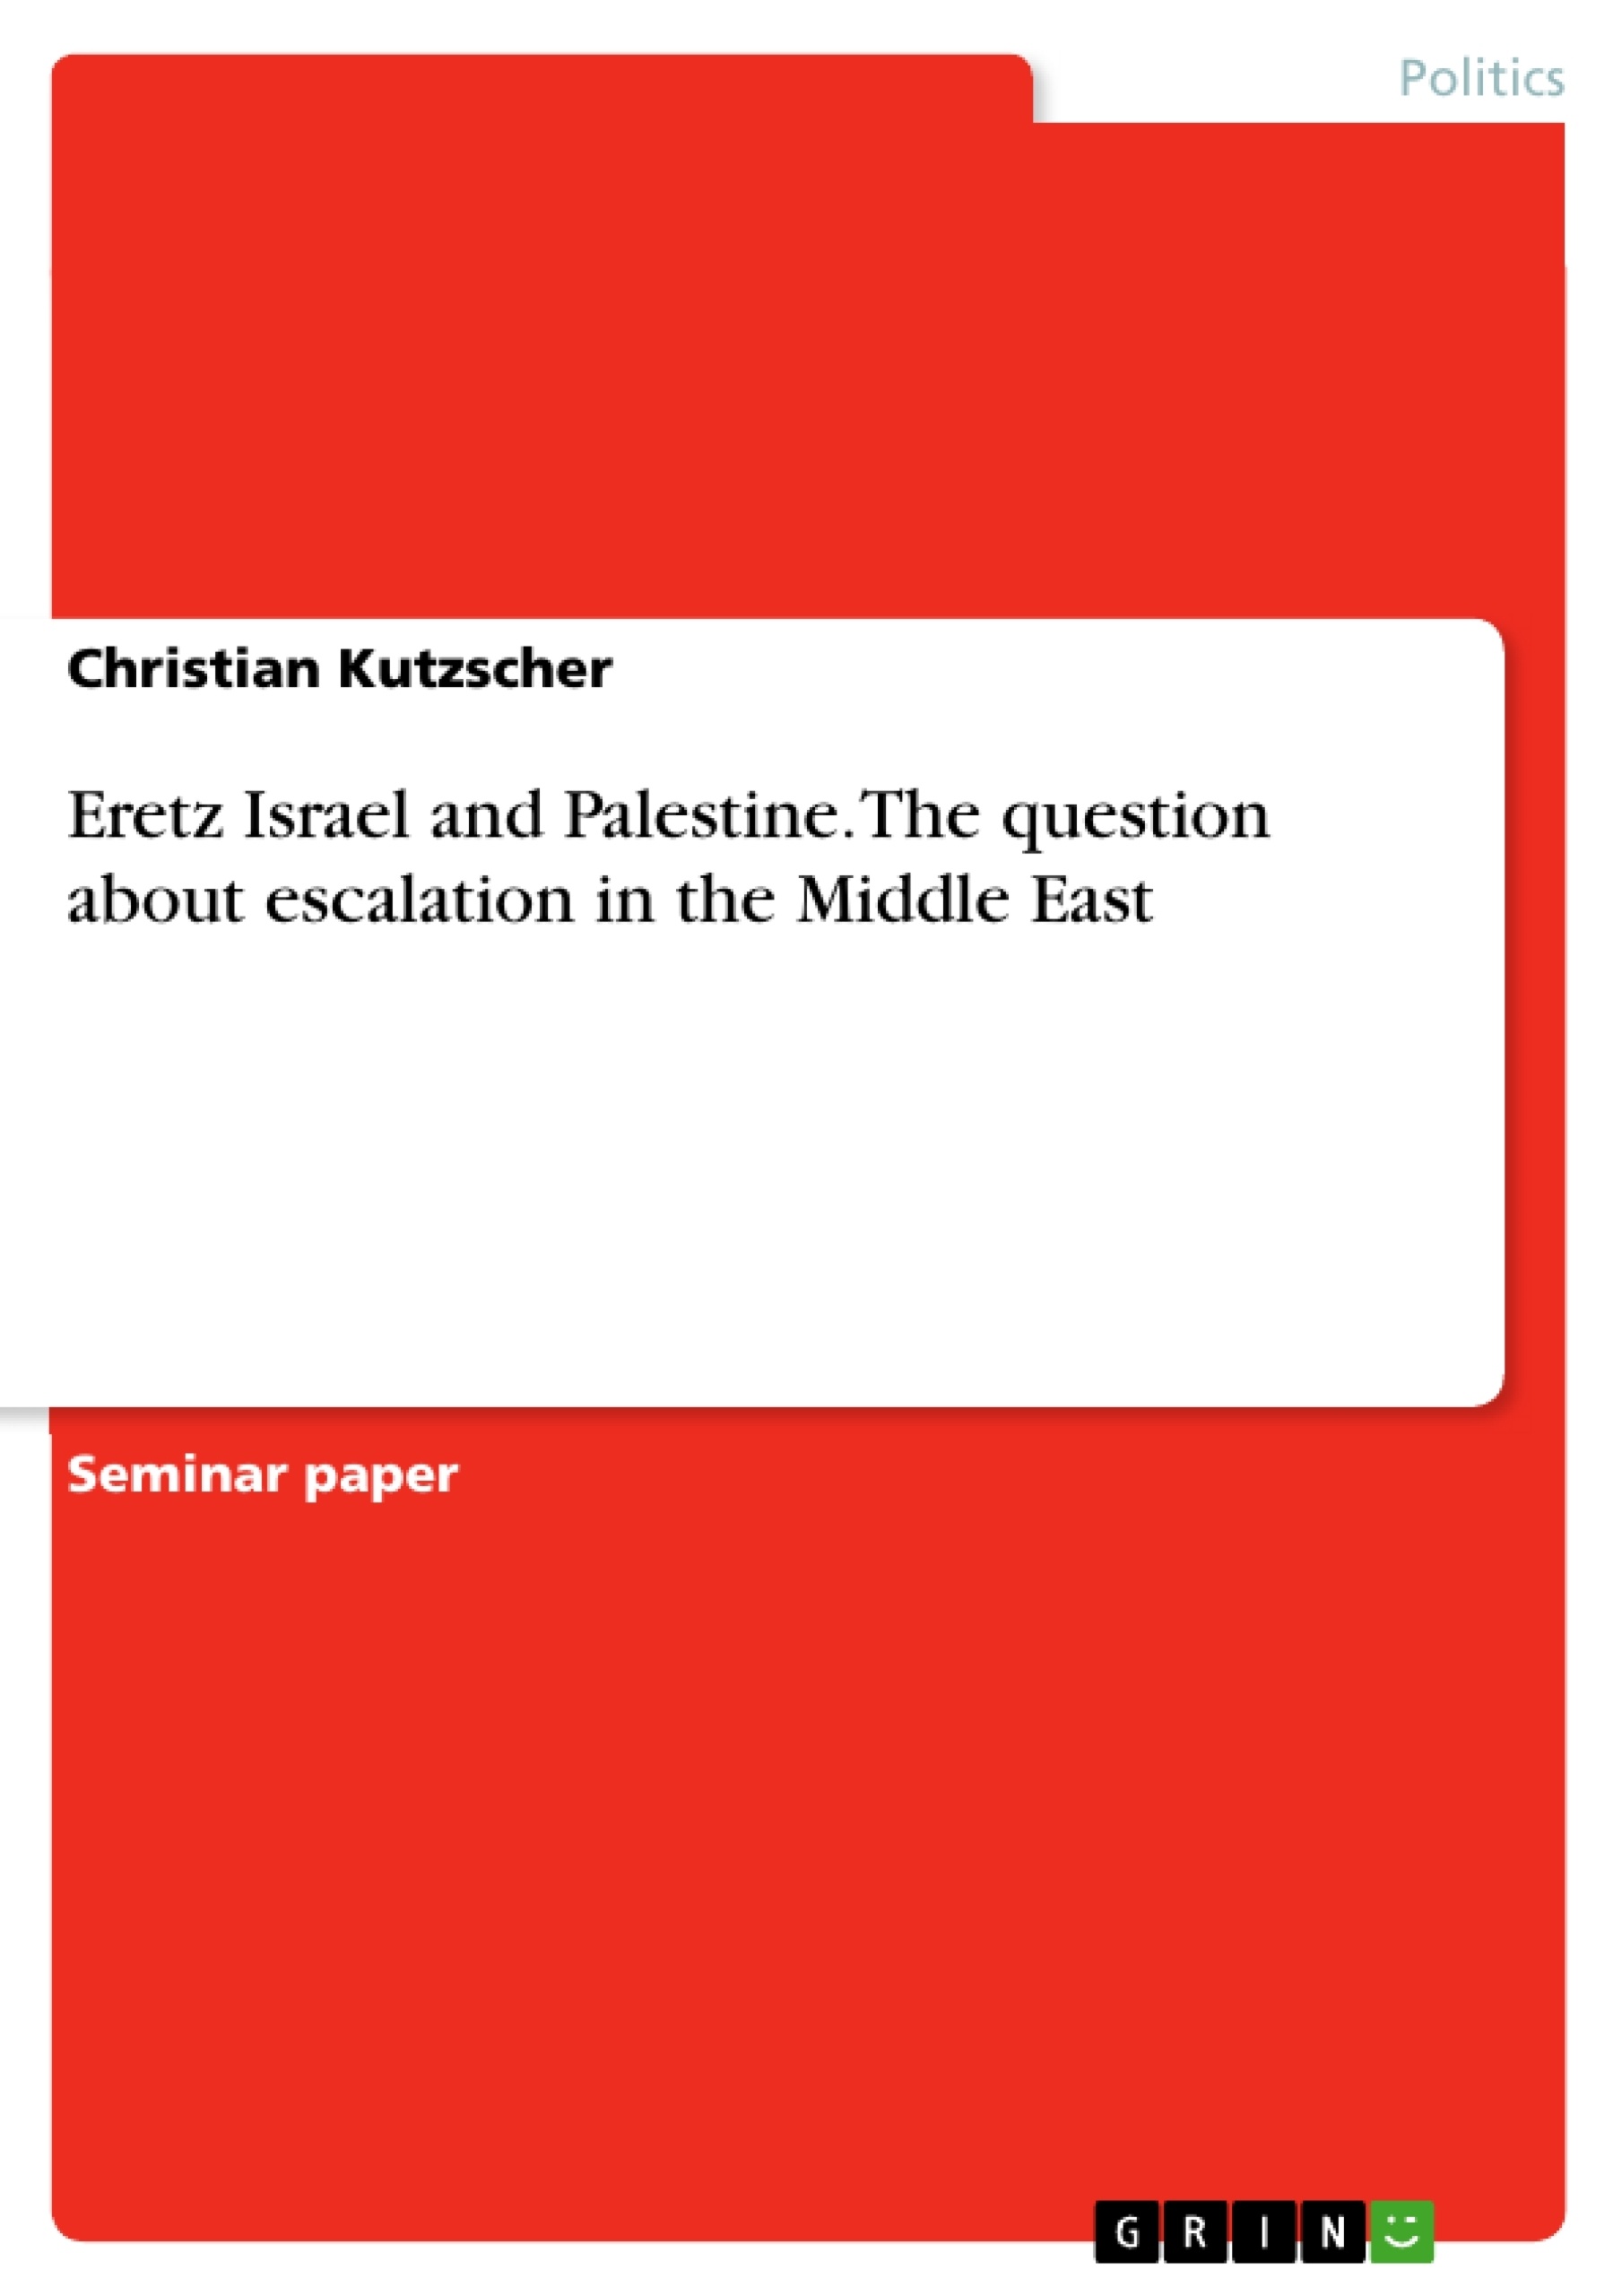 Titre: Eretz Israel and Palestine. The question about escalation in the Middle East